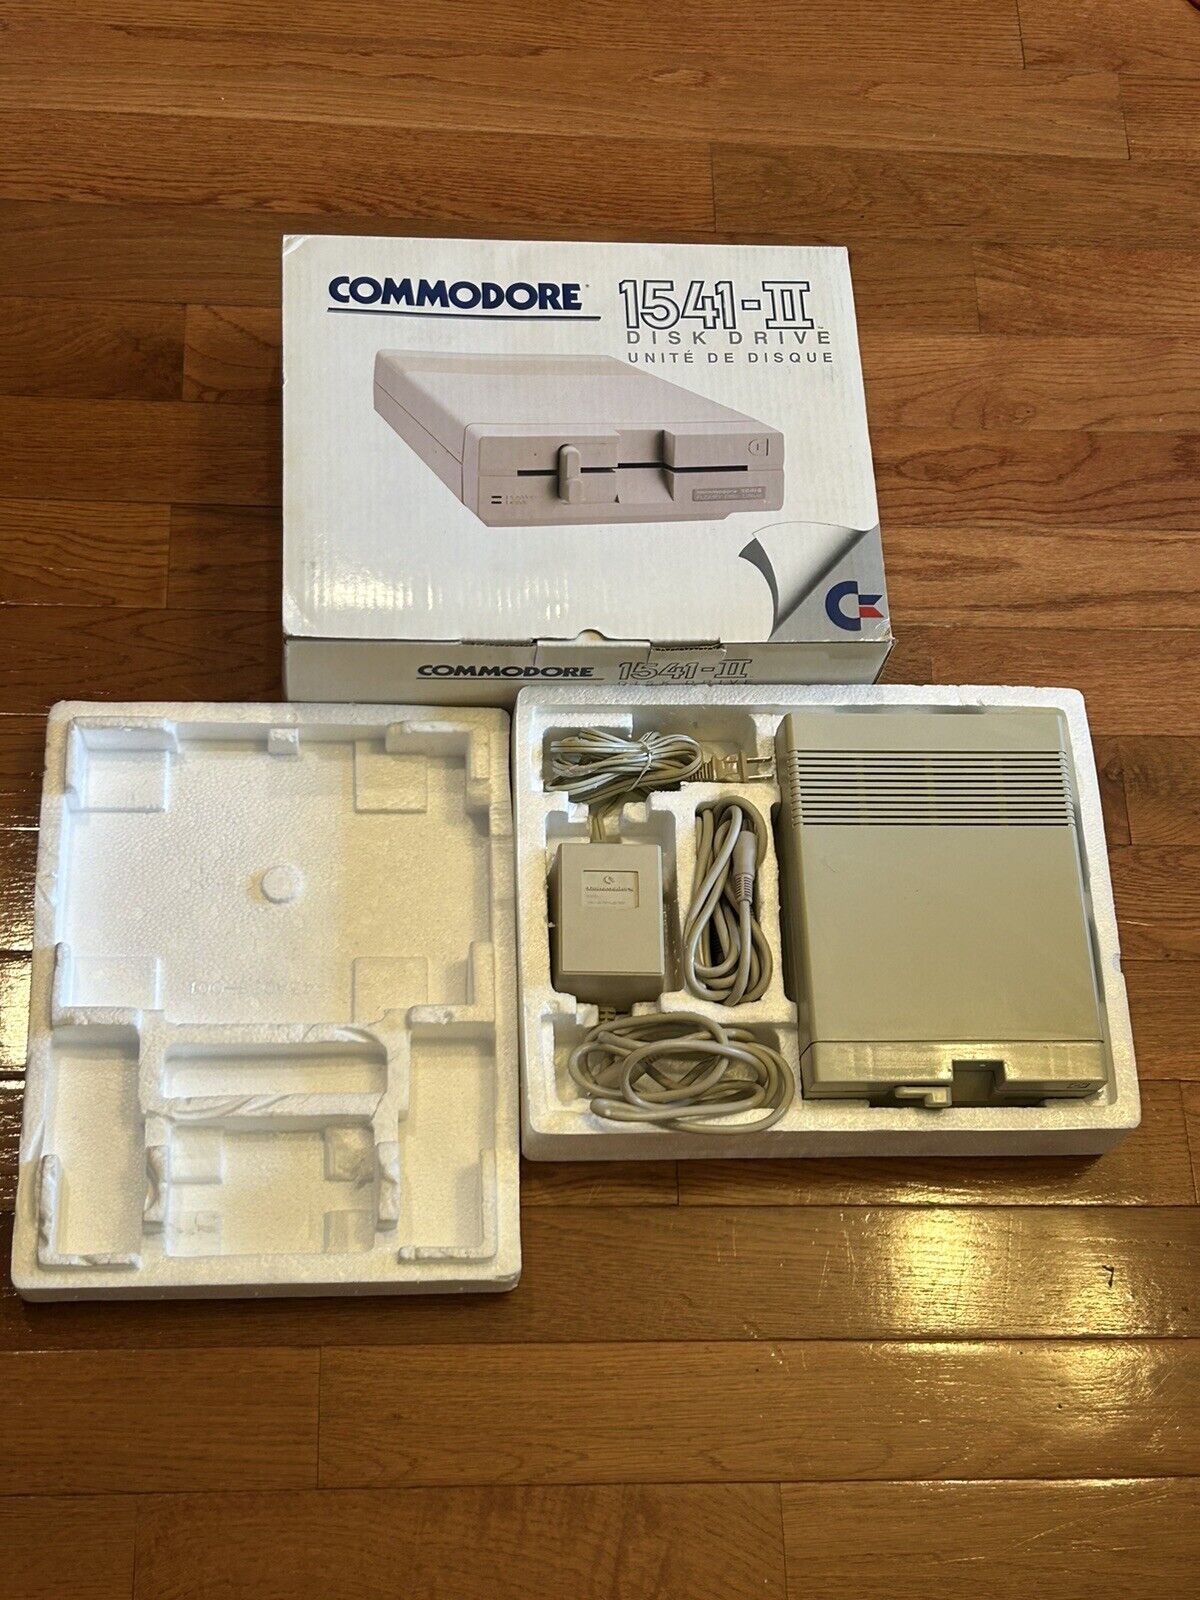 Commodore 1541-II disk drive complete W/Original Box-C64/128 (Tested Works)